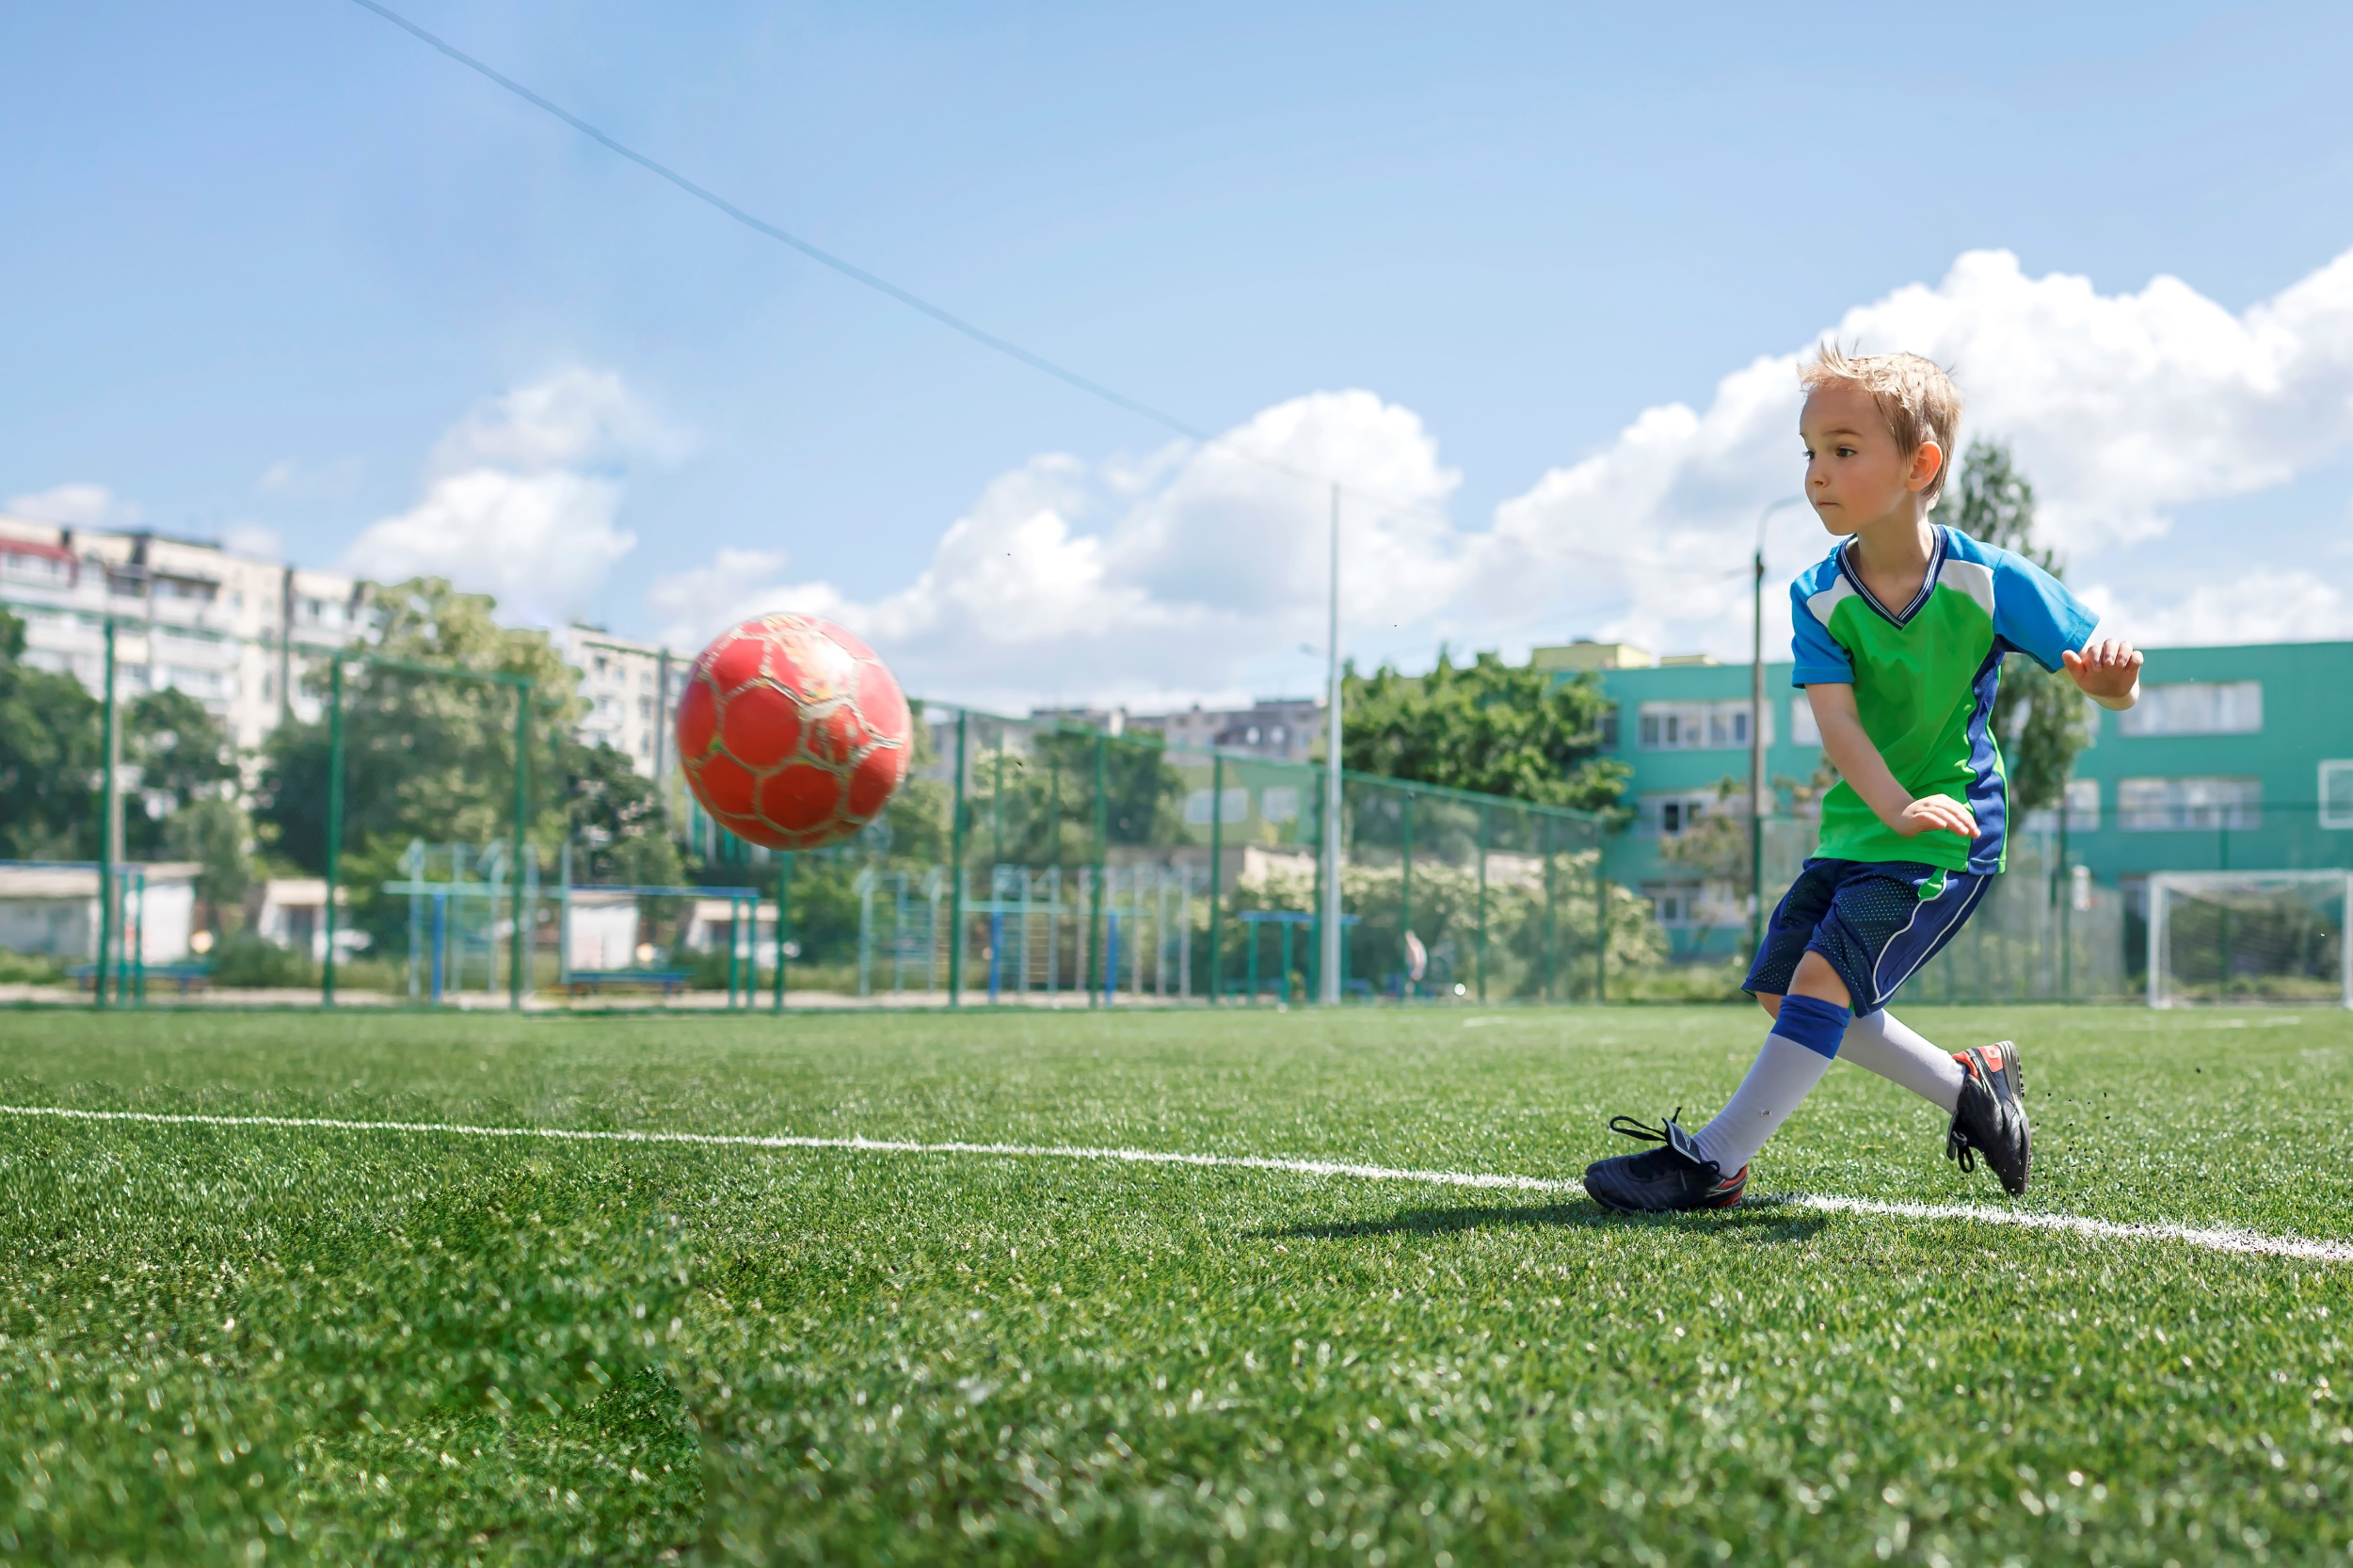 little-boy-in-blue-and-green-form-playing-football-on-open-field-in-the-yard-a-young-soccer-player.jpg